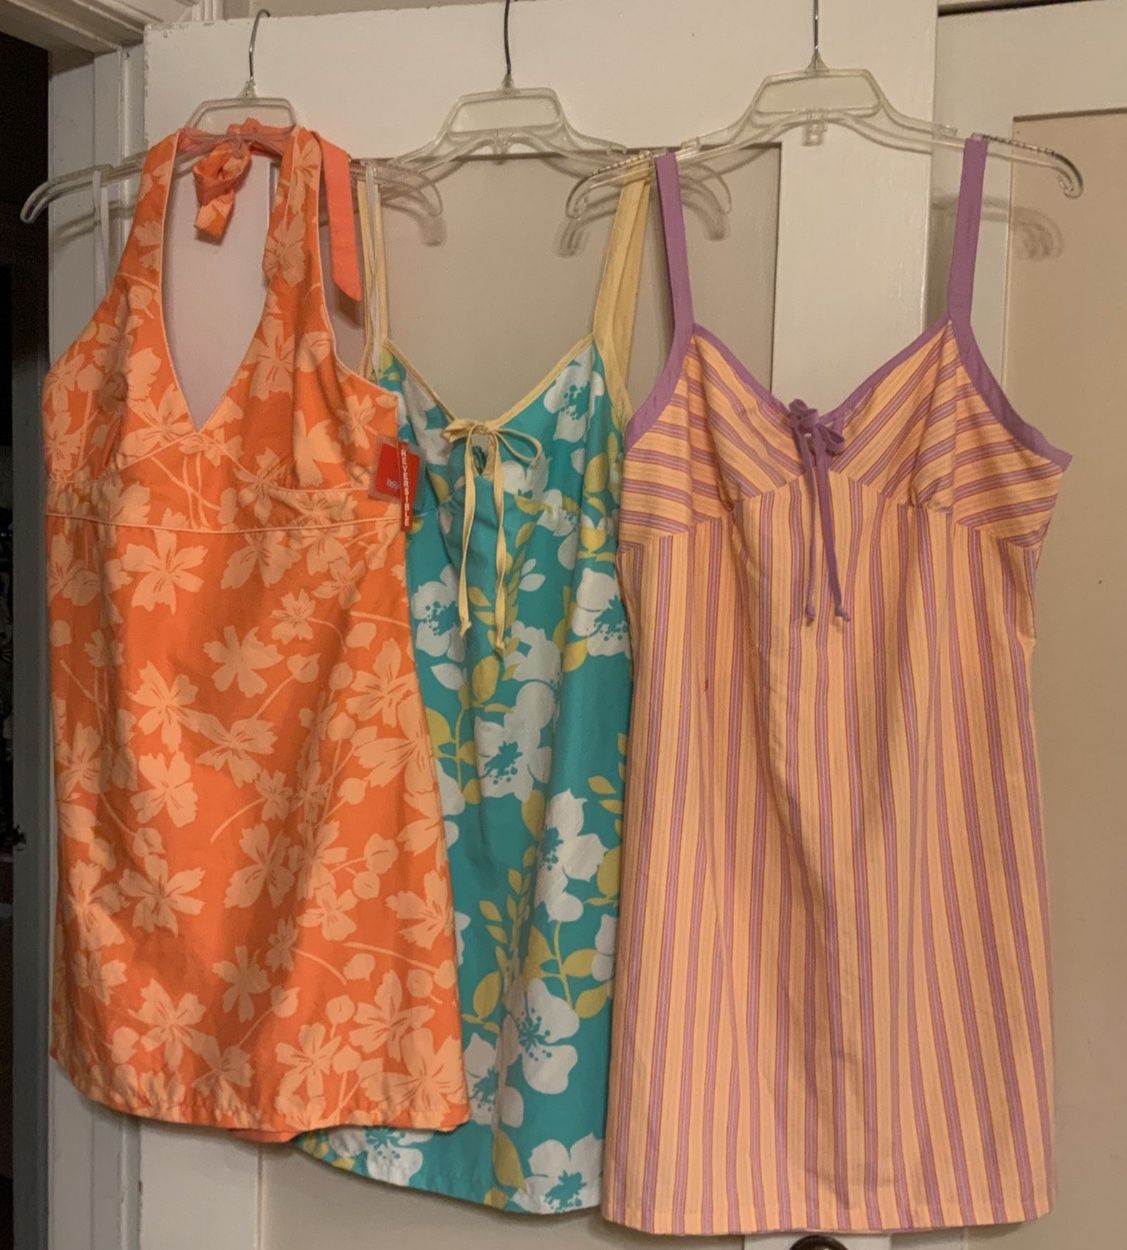 3 Brand New With Tags MOSSIMO Reversible Sundresses ~ Summer Tropical Hawaiian Print ~ Junior Size 2XL (Size 11 or 13)